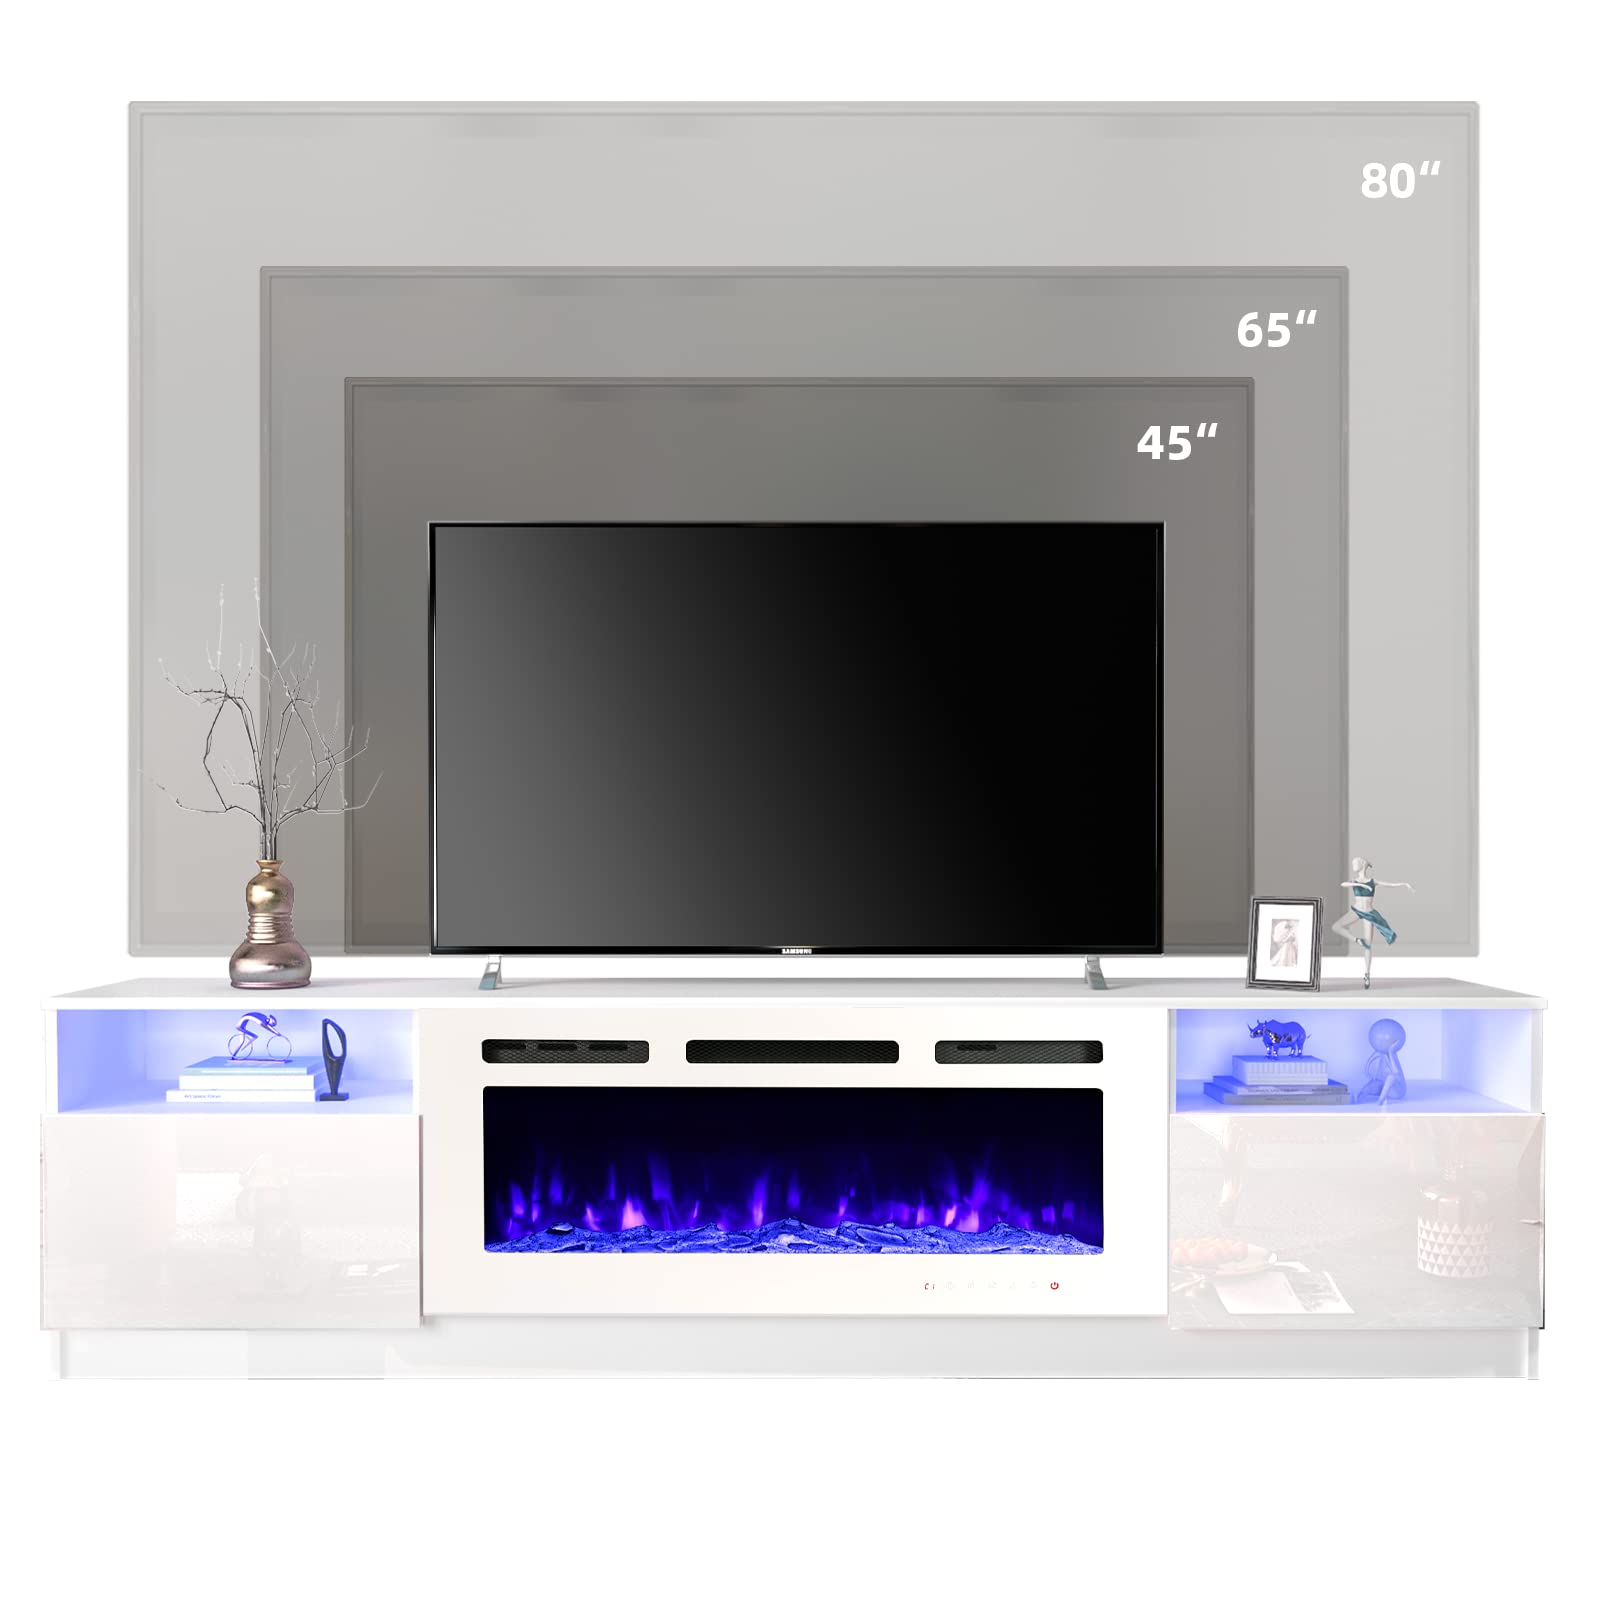 EROMMY 80'' Fireplace TV Stand with 40'' Electric Fireplace, Entertainment Center with 16 Color Led Lights and 12 Flame Fireplace Insert Heater, TV Console for TVs up to 90'' for Living Room, White